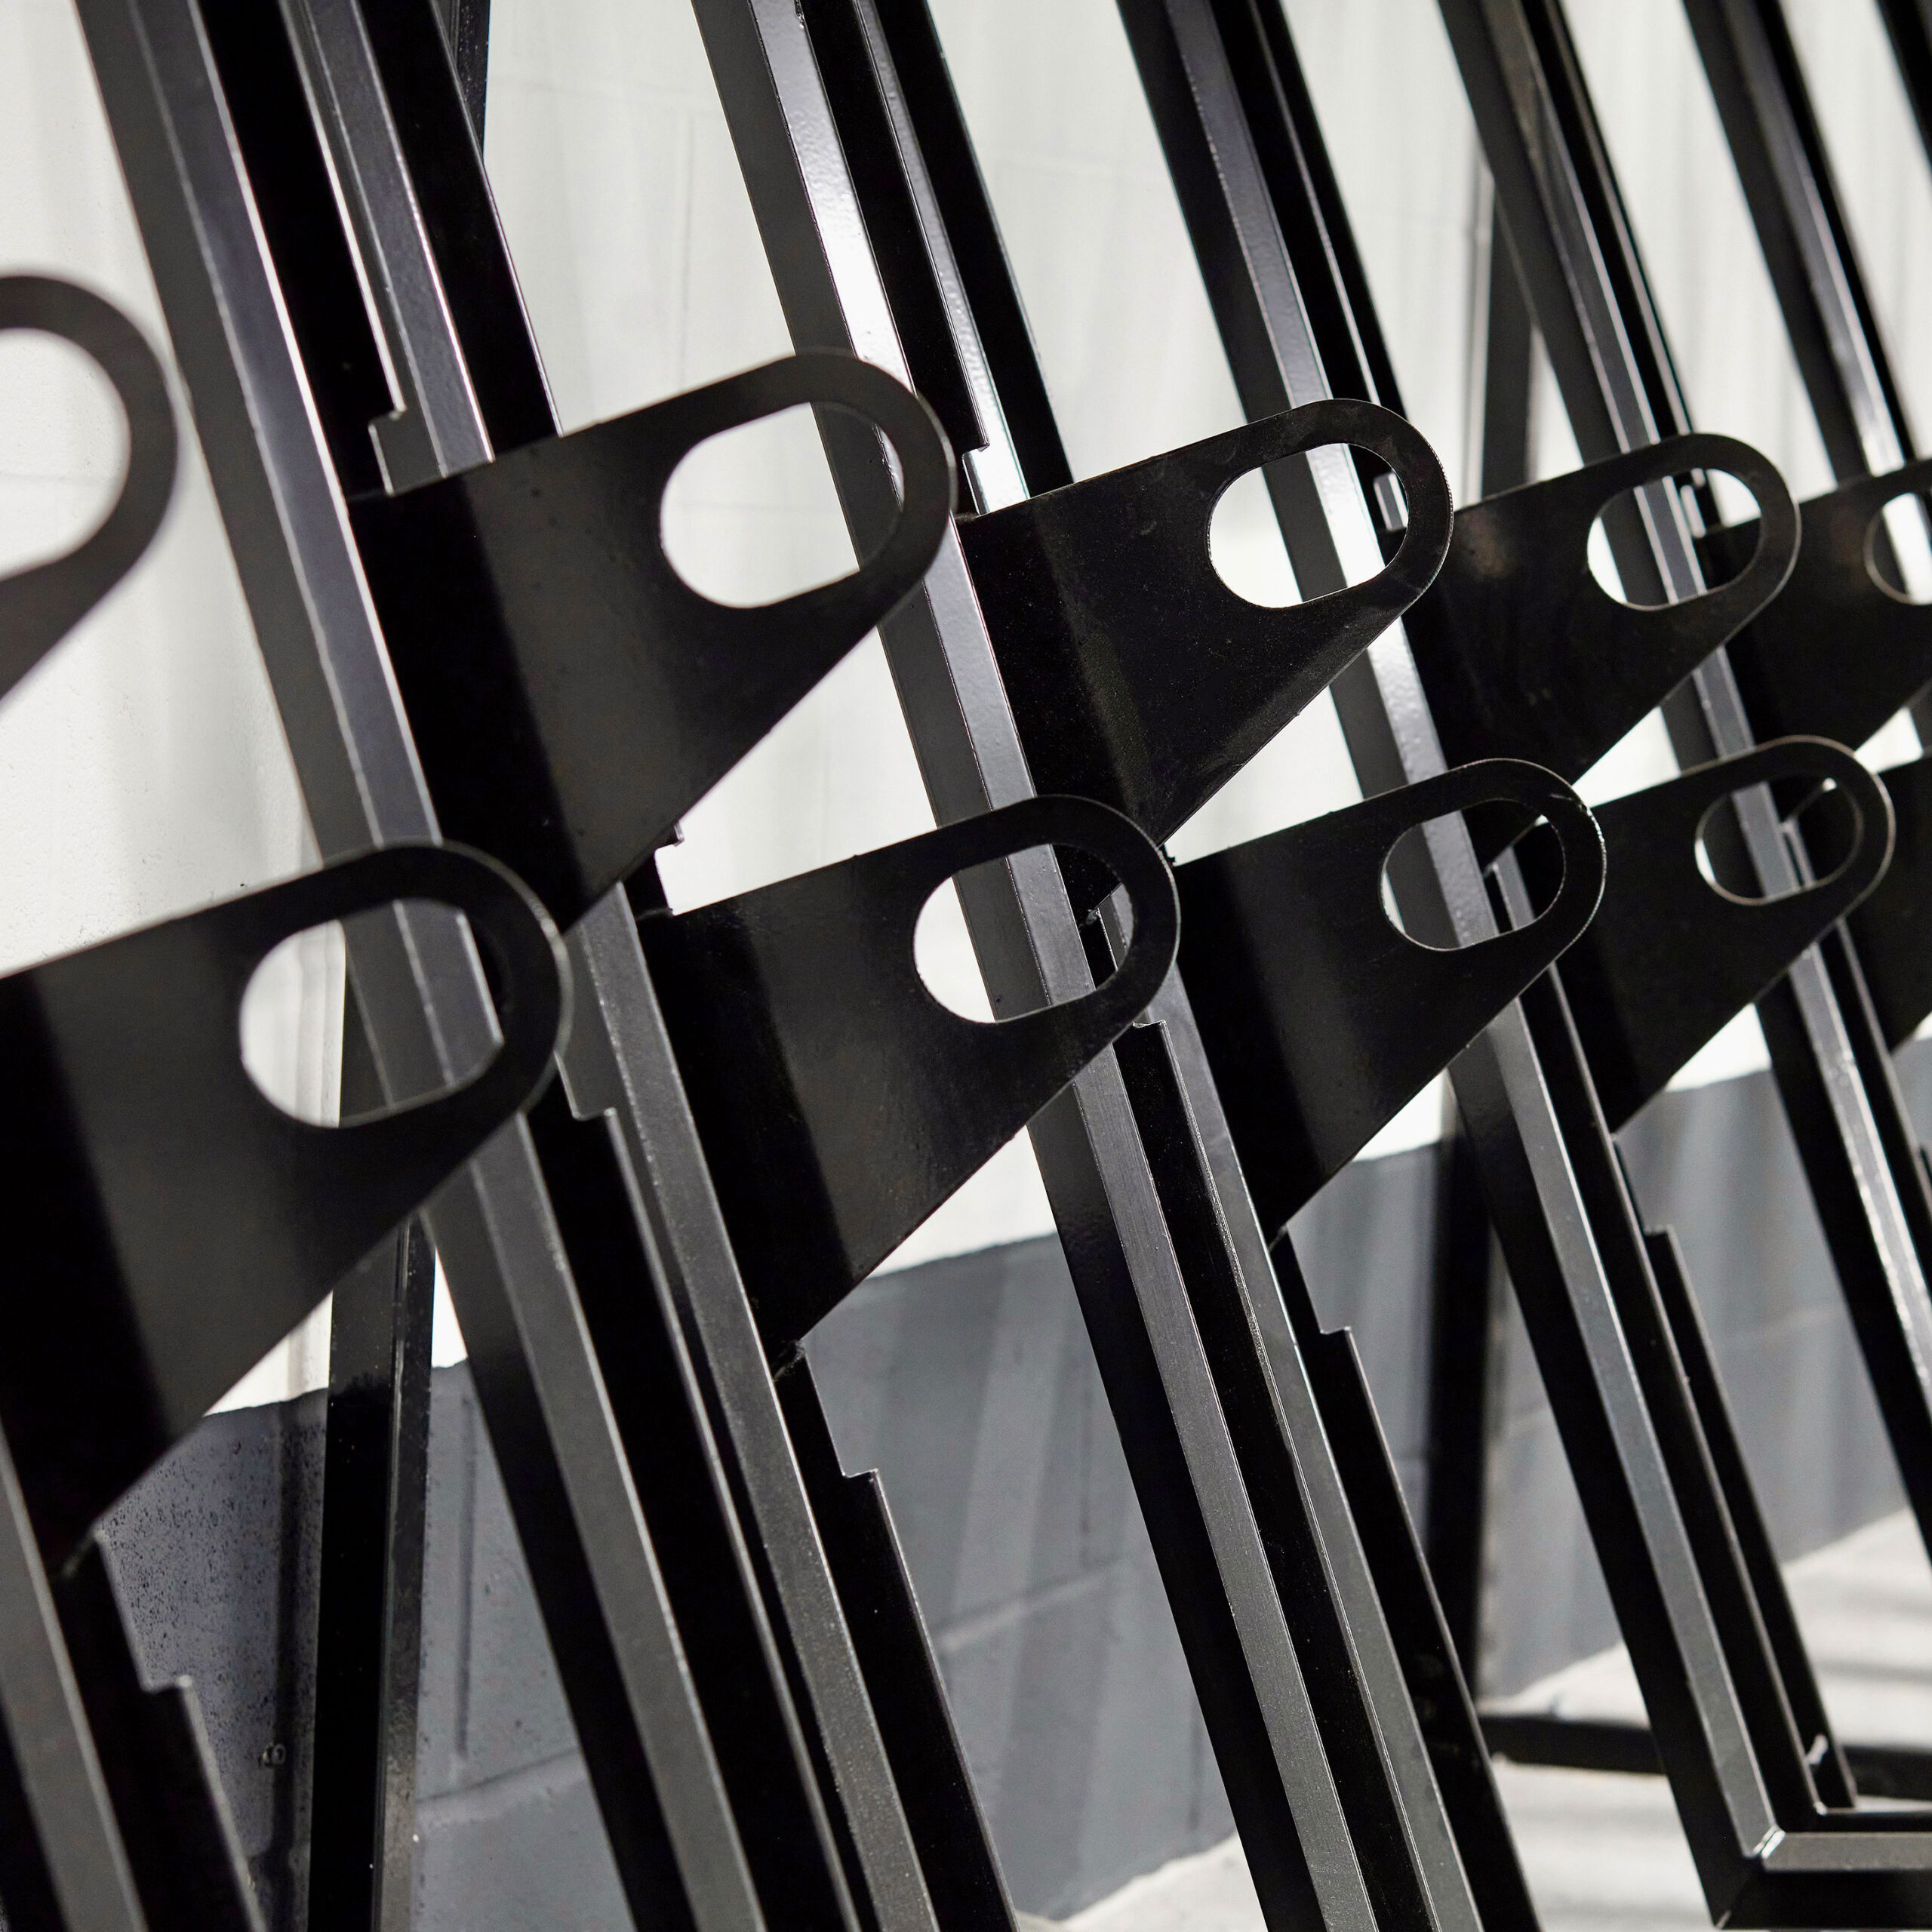 Close-up of several black metal semi vertical bike racks positioned in a row. The brackets have a sleek, modern design with a circular cutout at one end. They are arranged diagonally against a white and gray background.